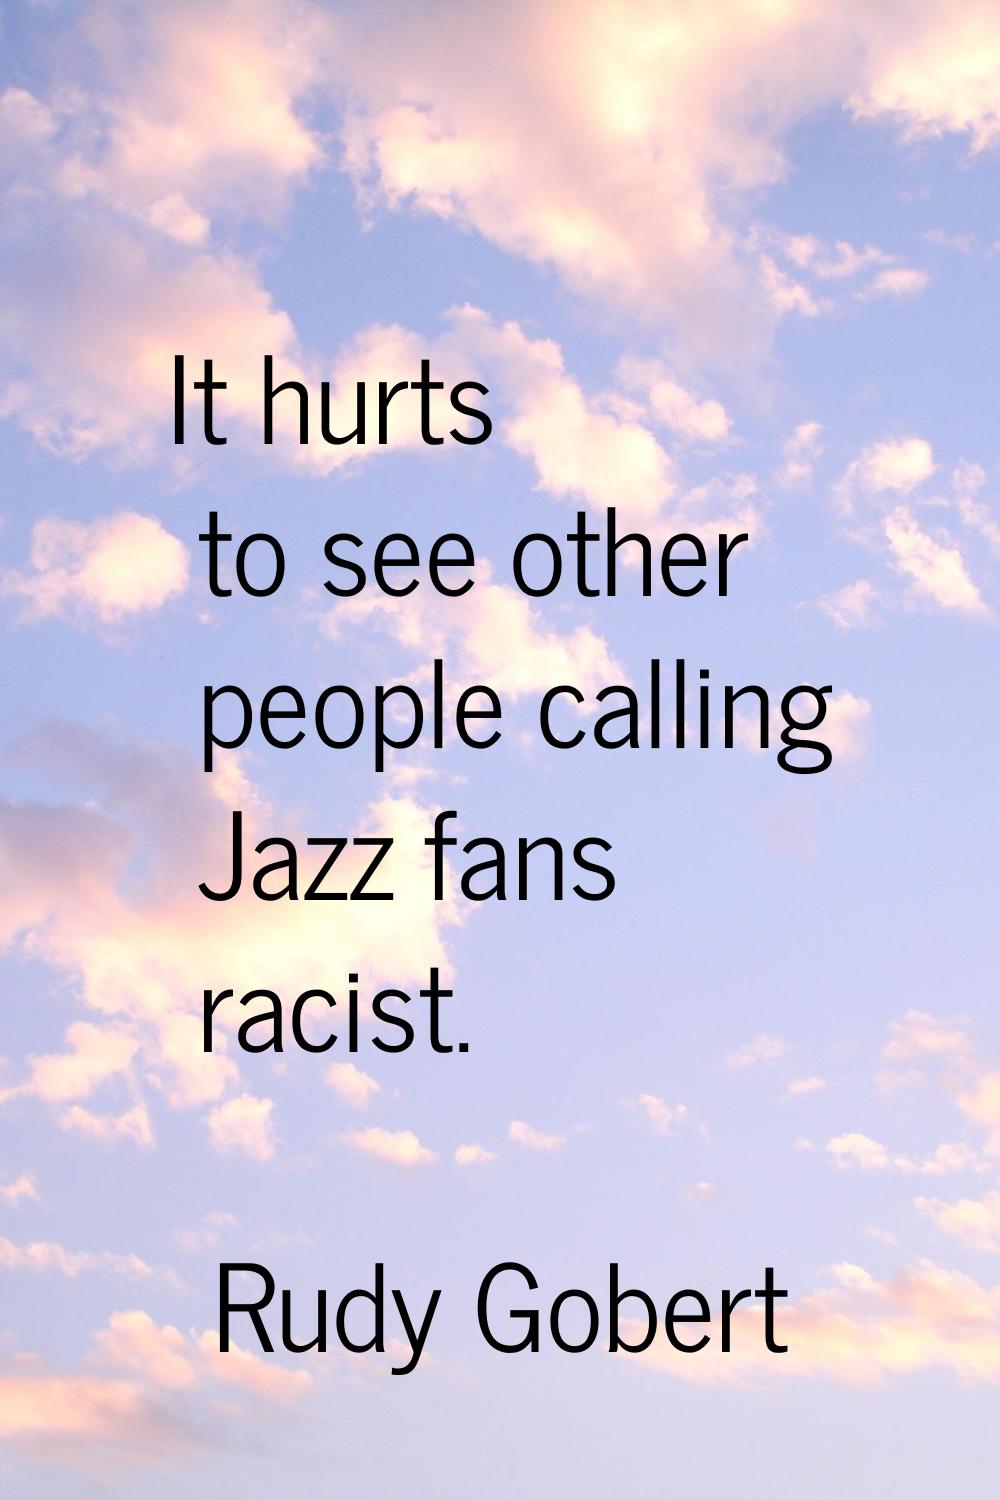 It hurts to see other people calling Jazz fans racist.